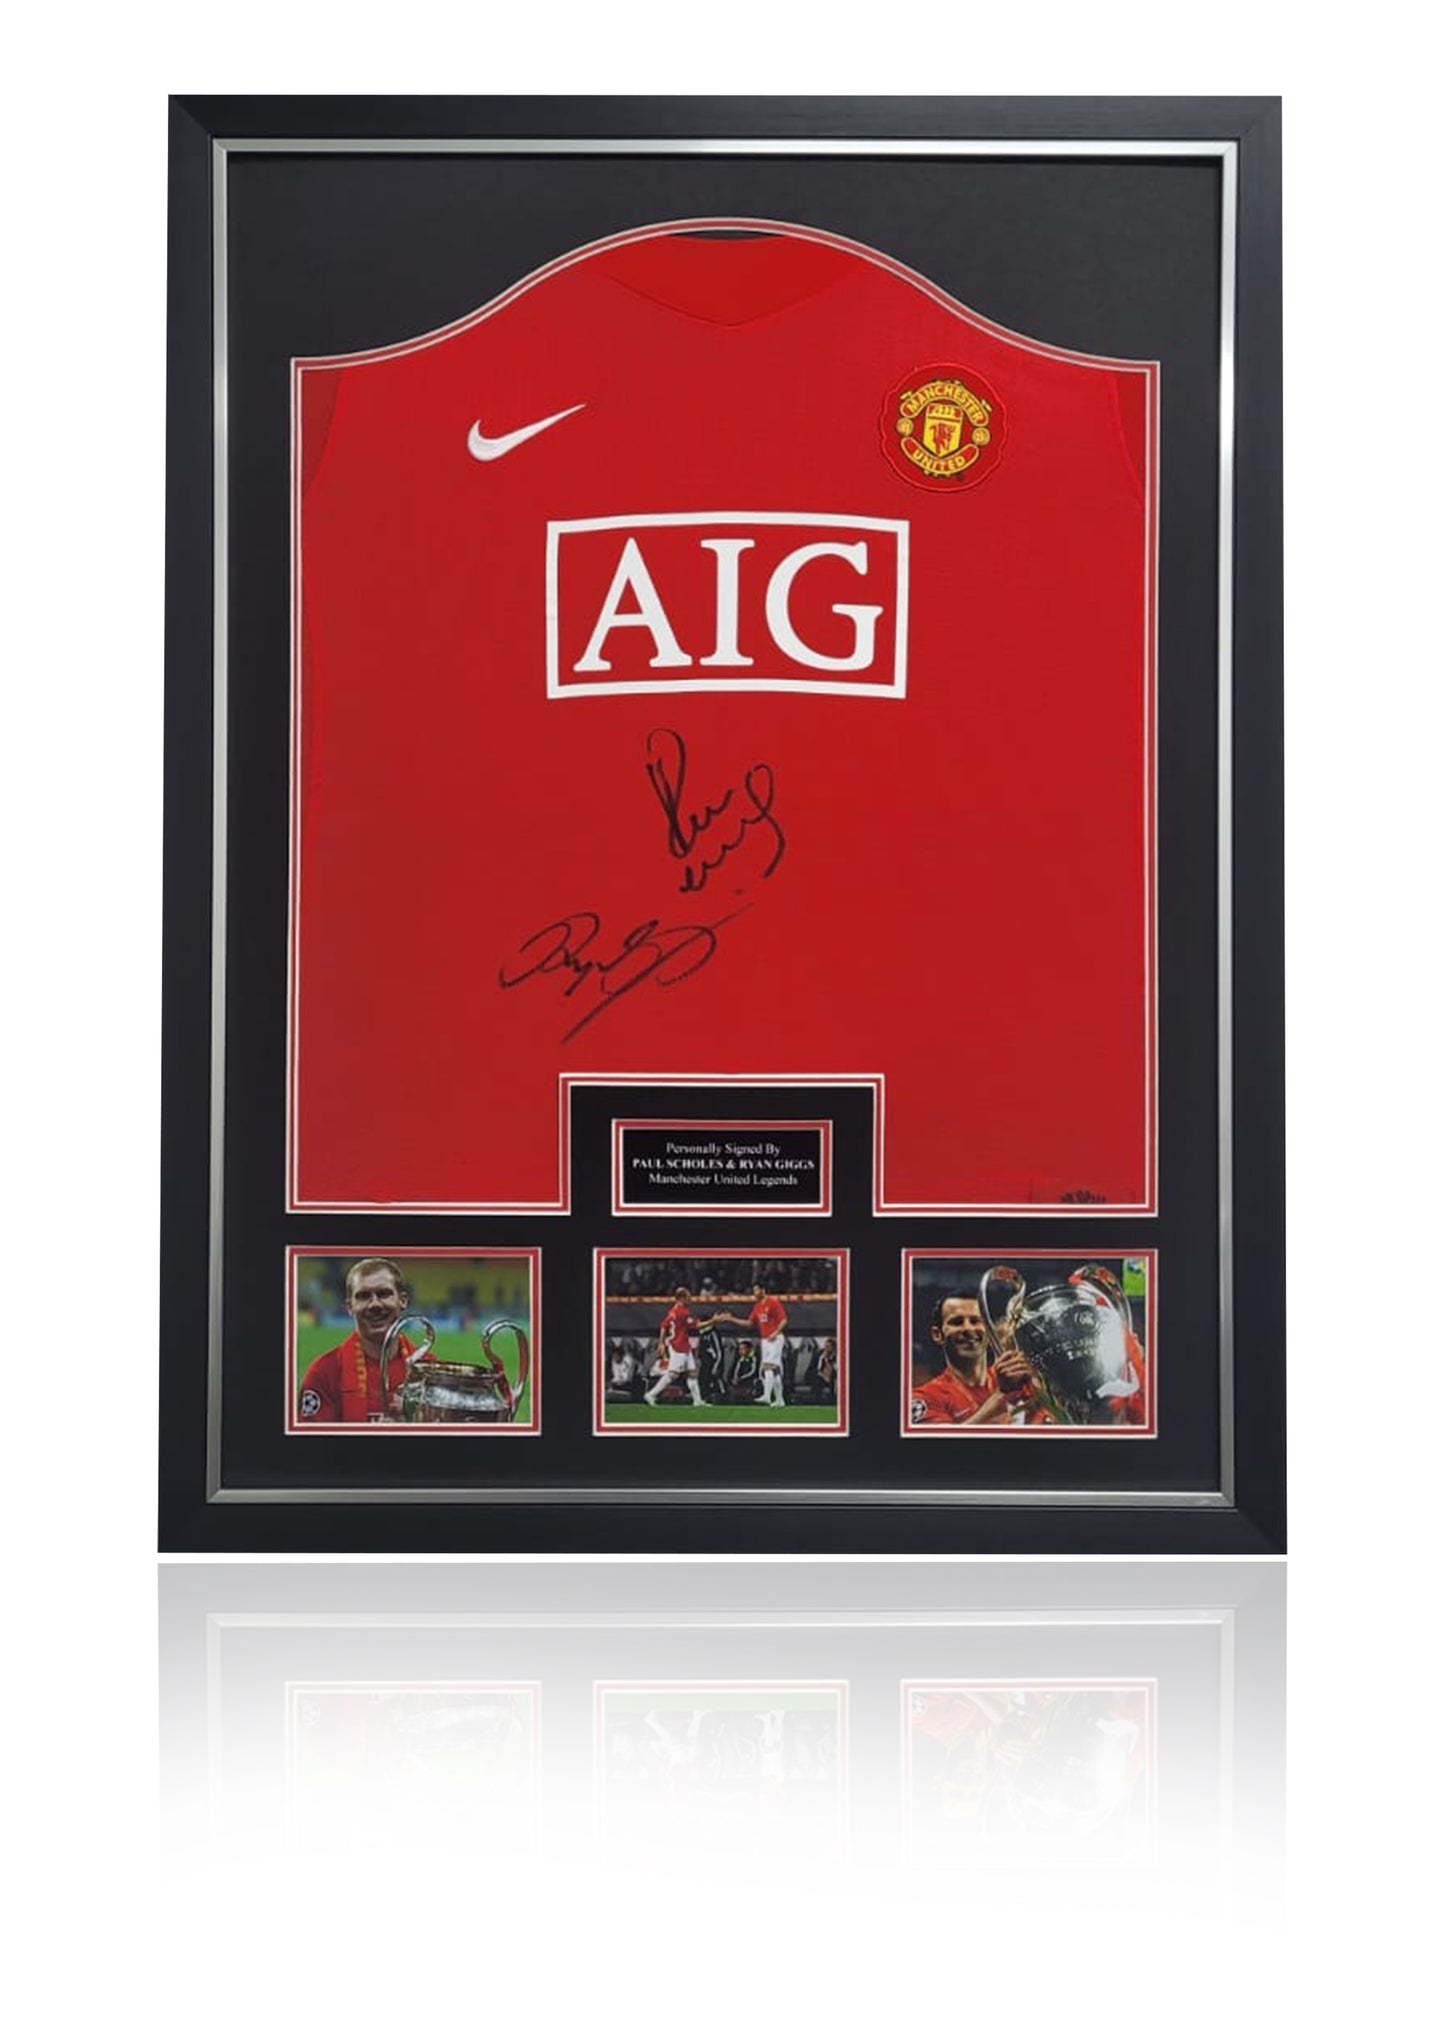 Paul Scholes and Ryan Giggs dual signed Manchester United shirt